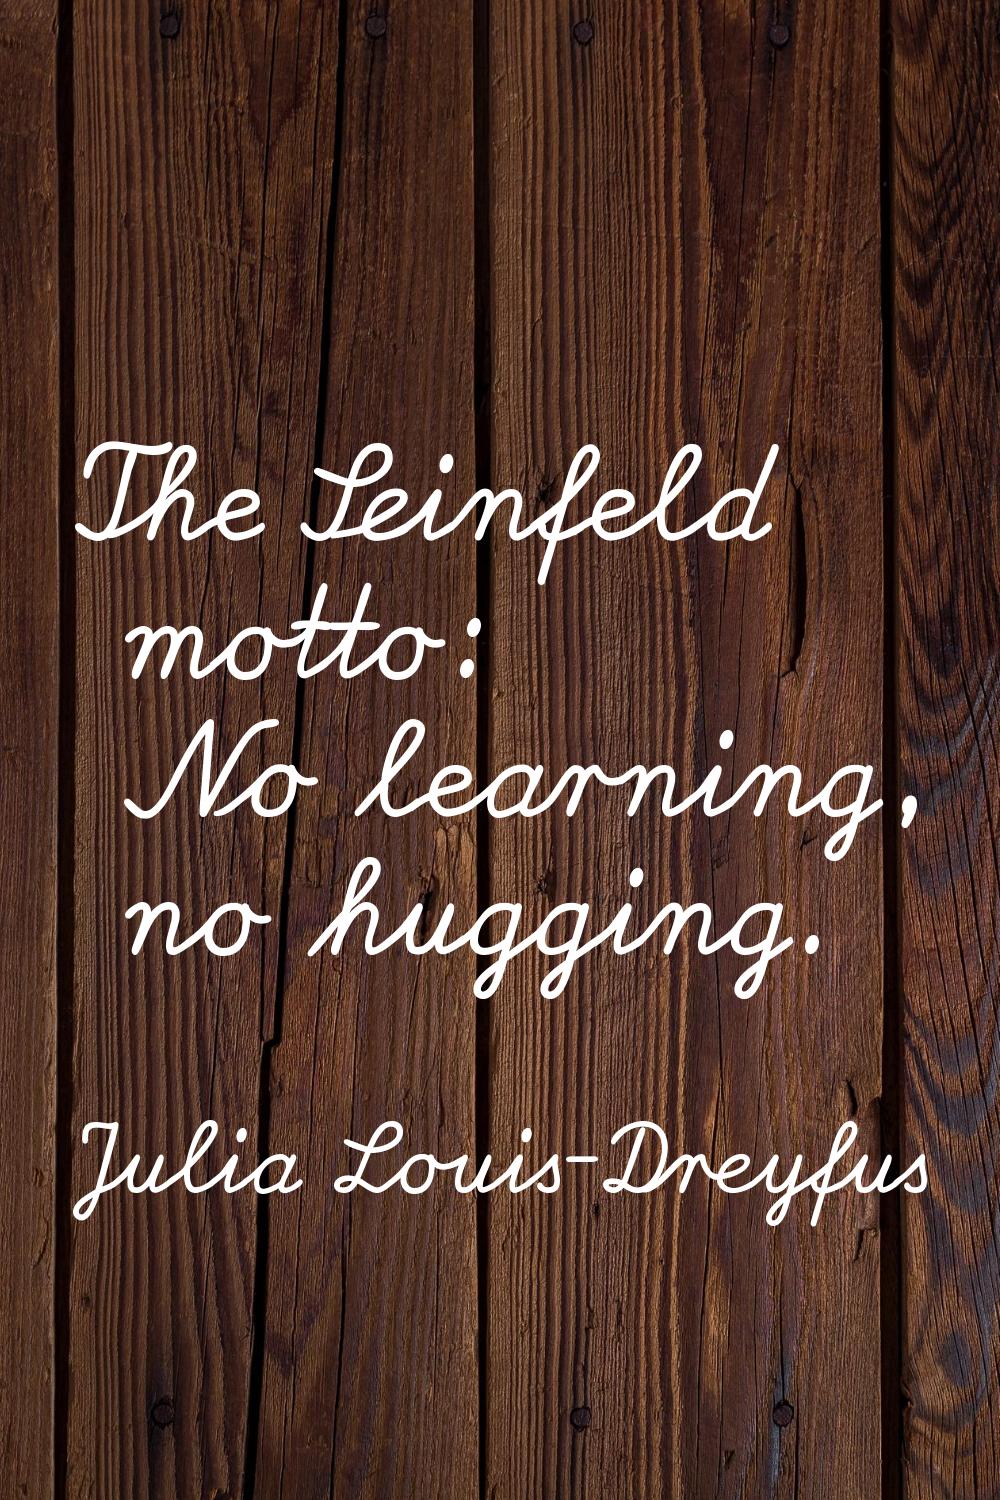 The Seinfeld motto: No learning, no hugging.